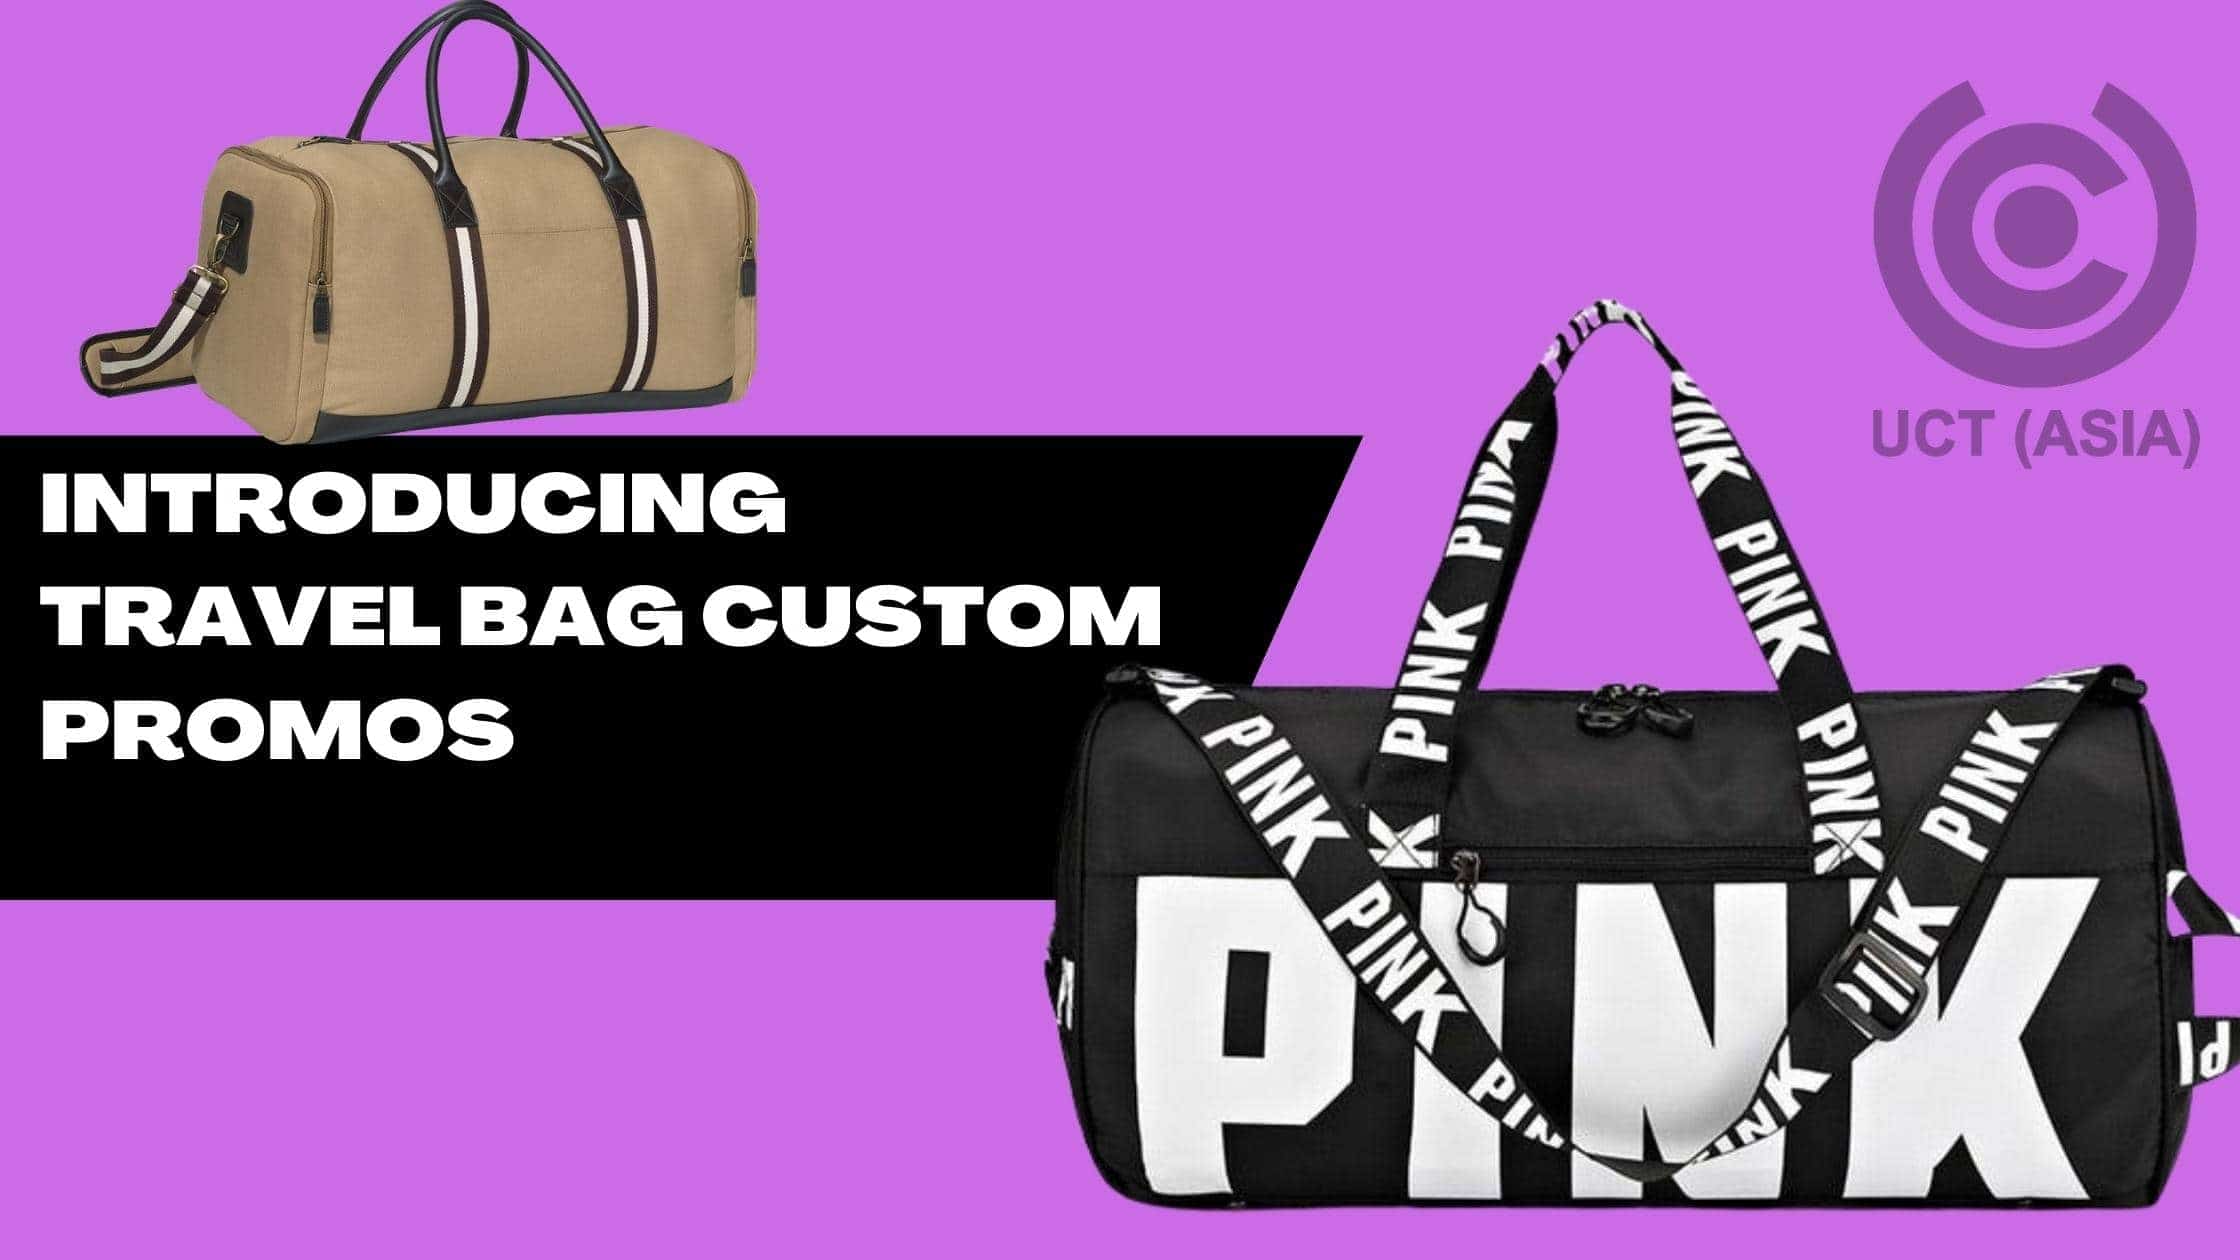 Custom Travel Bag Promos: Why are they so effective? - UCT (Asia)